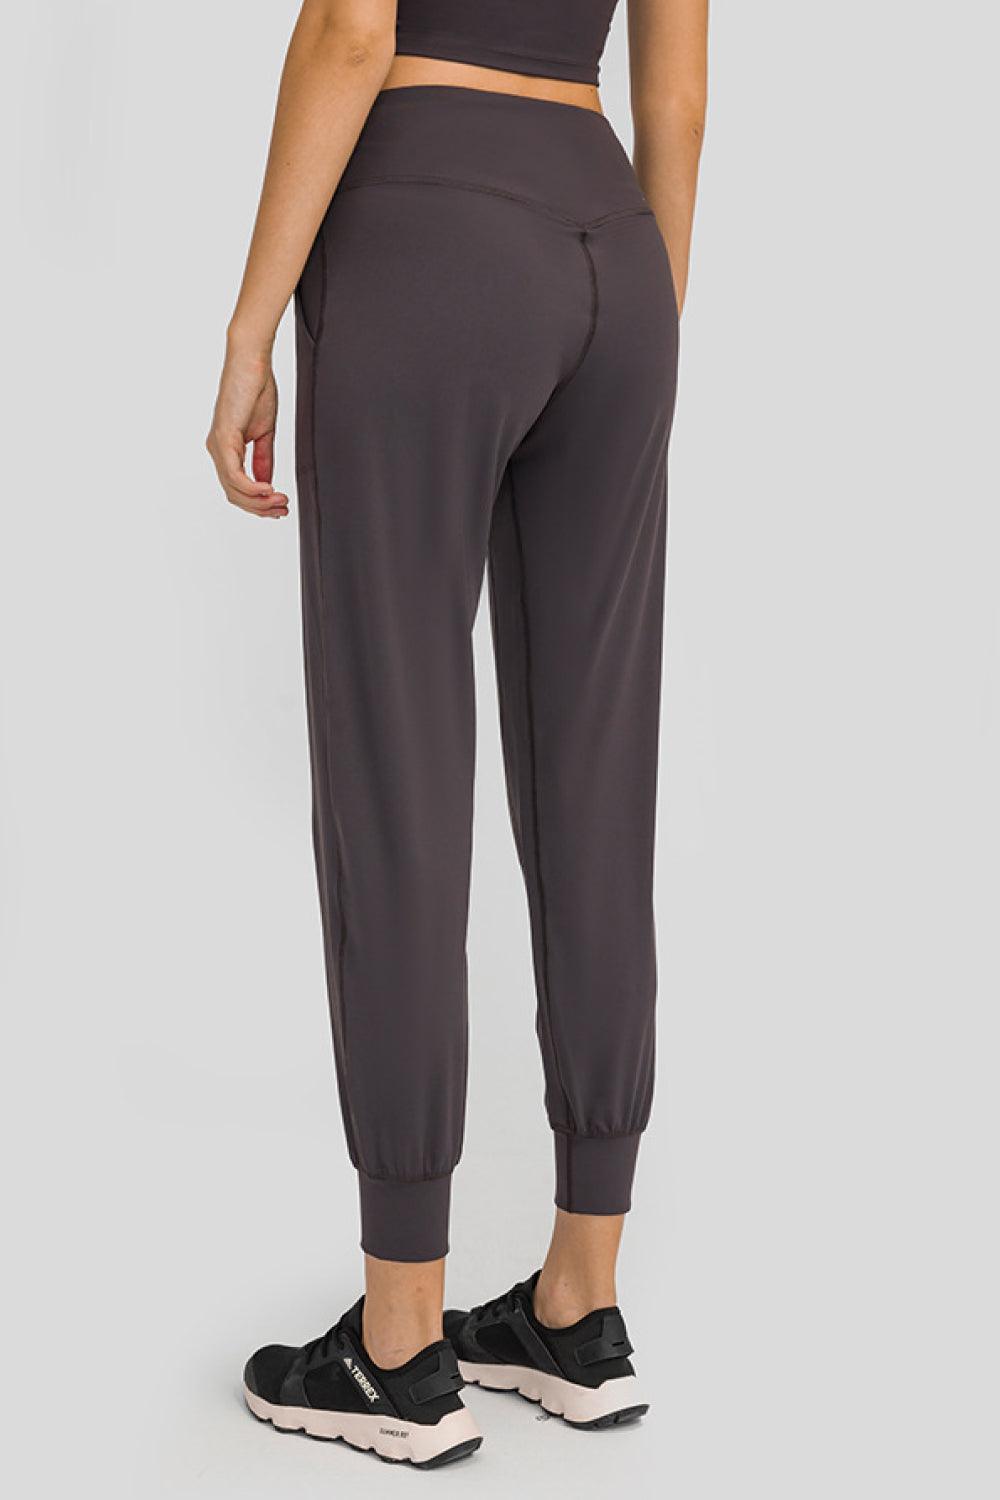 Wide Waistband Tapered Yoga Pants - Olive Ave